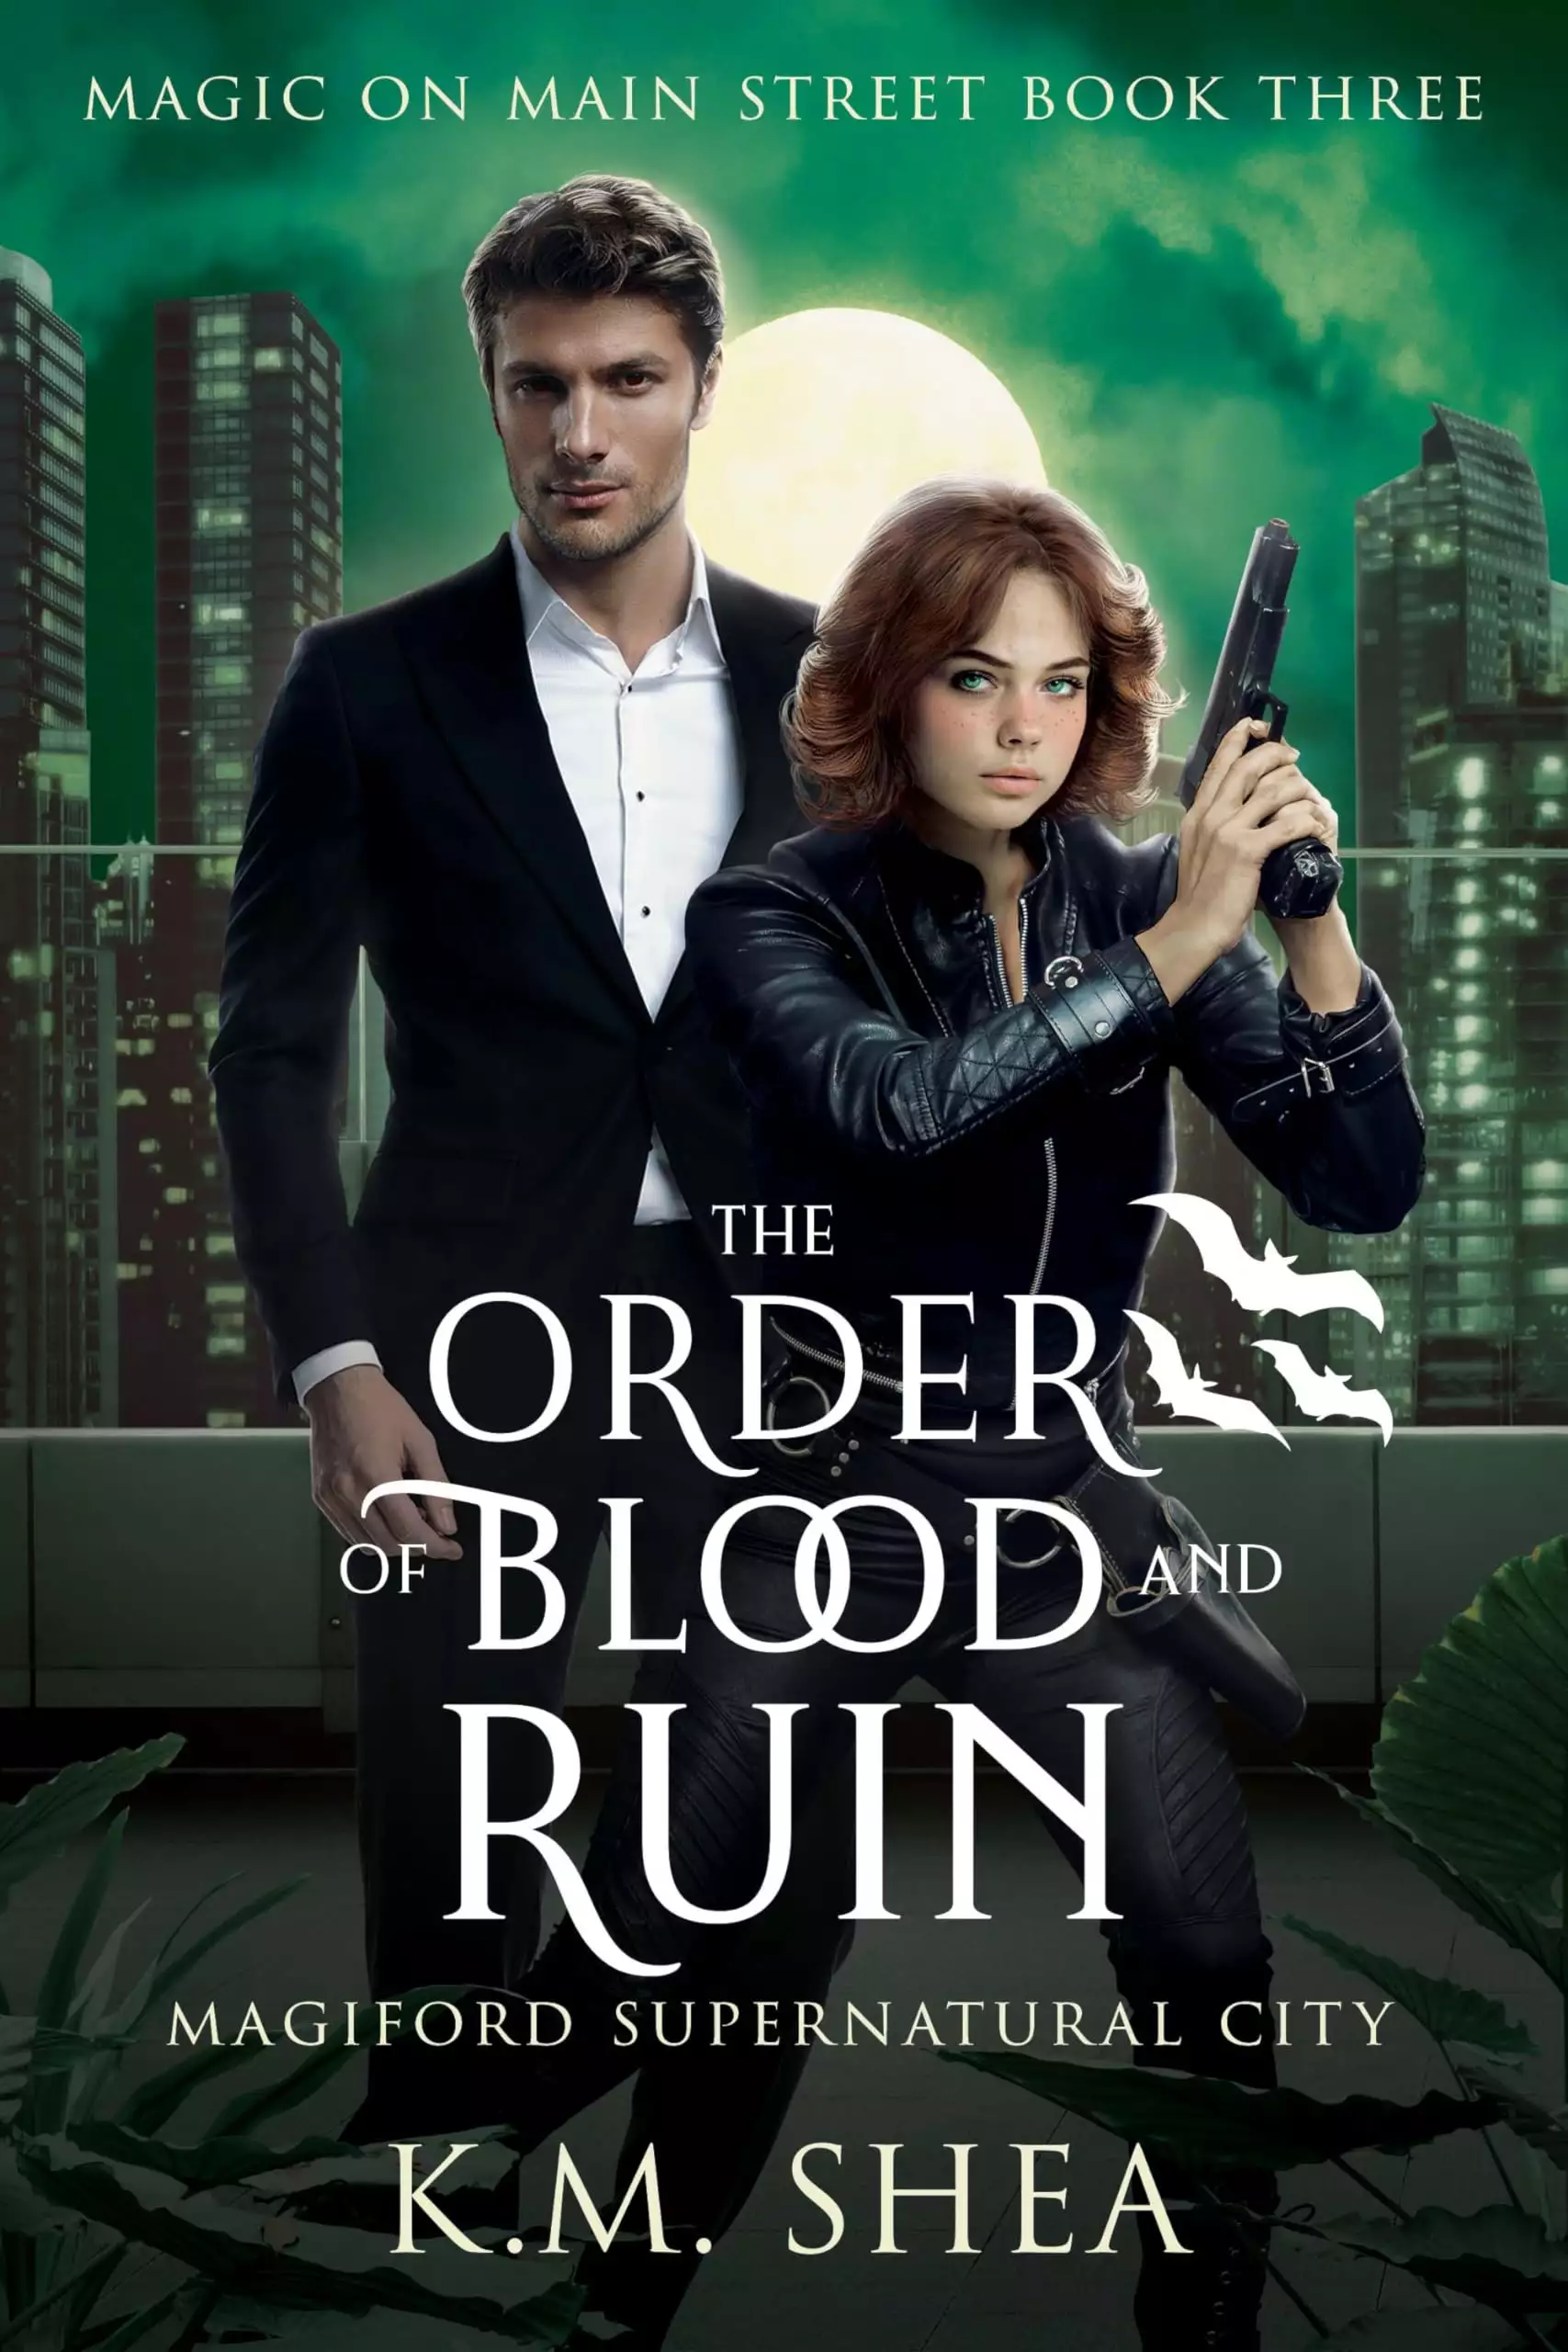 The Order of Blood and Ruin: Magiford Supernatural City